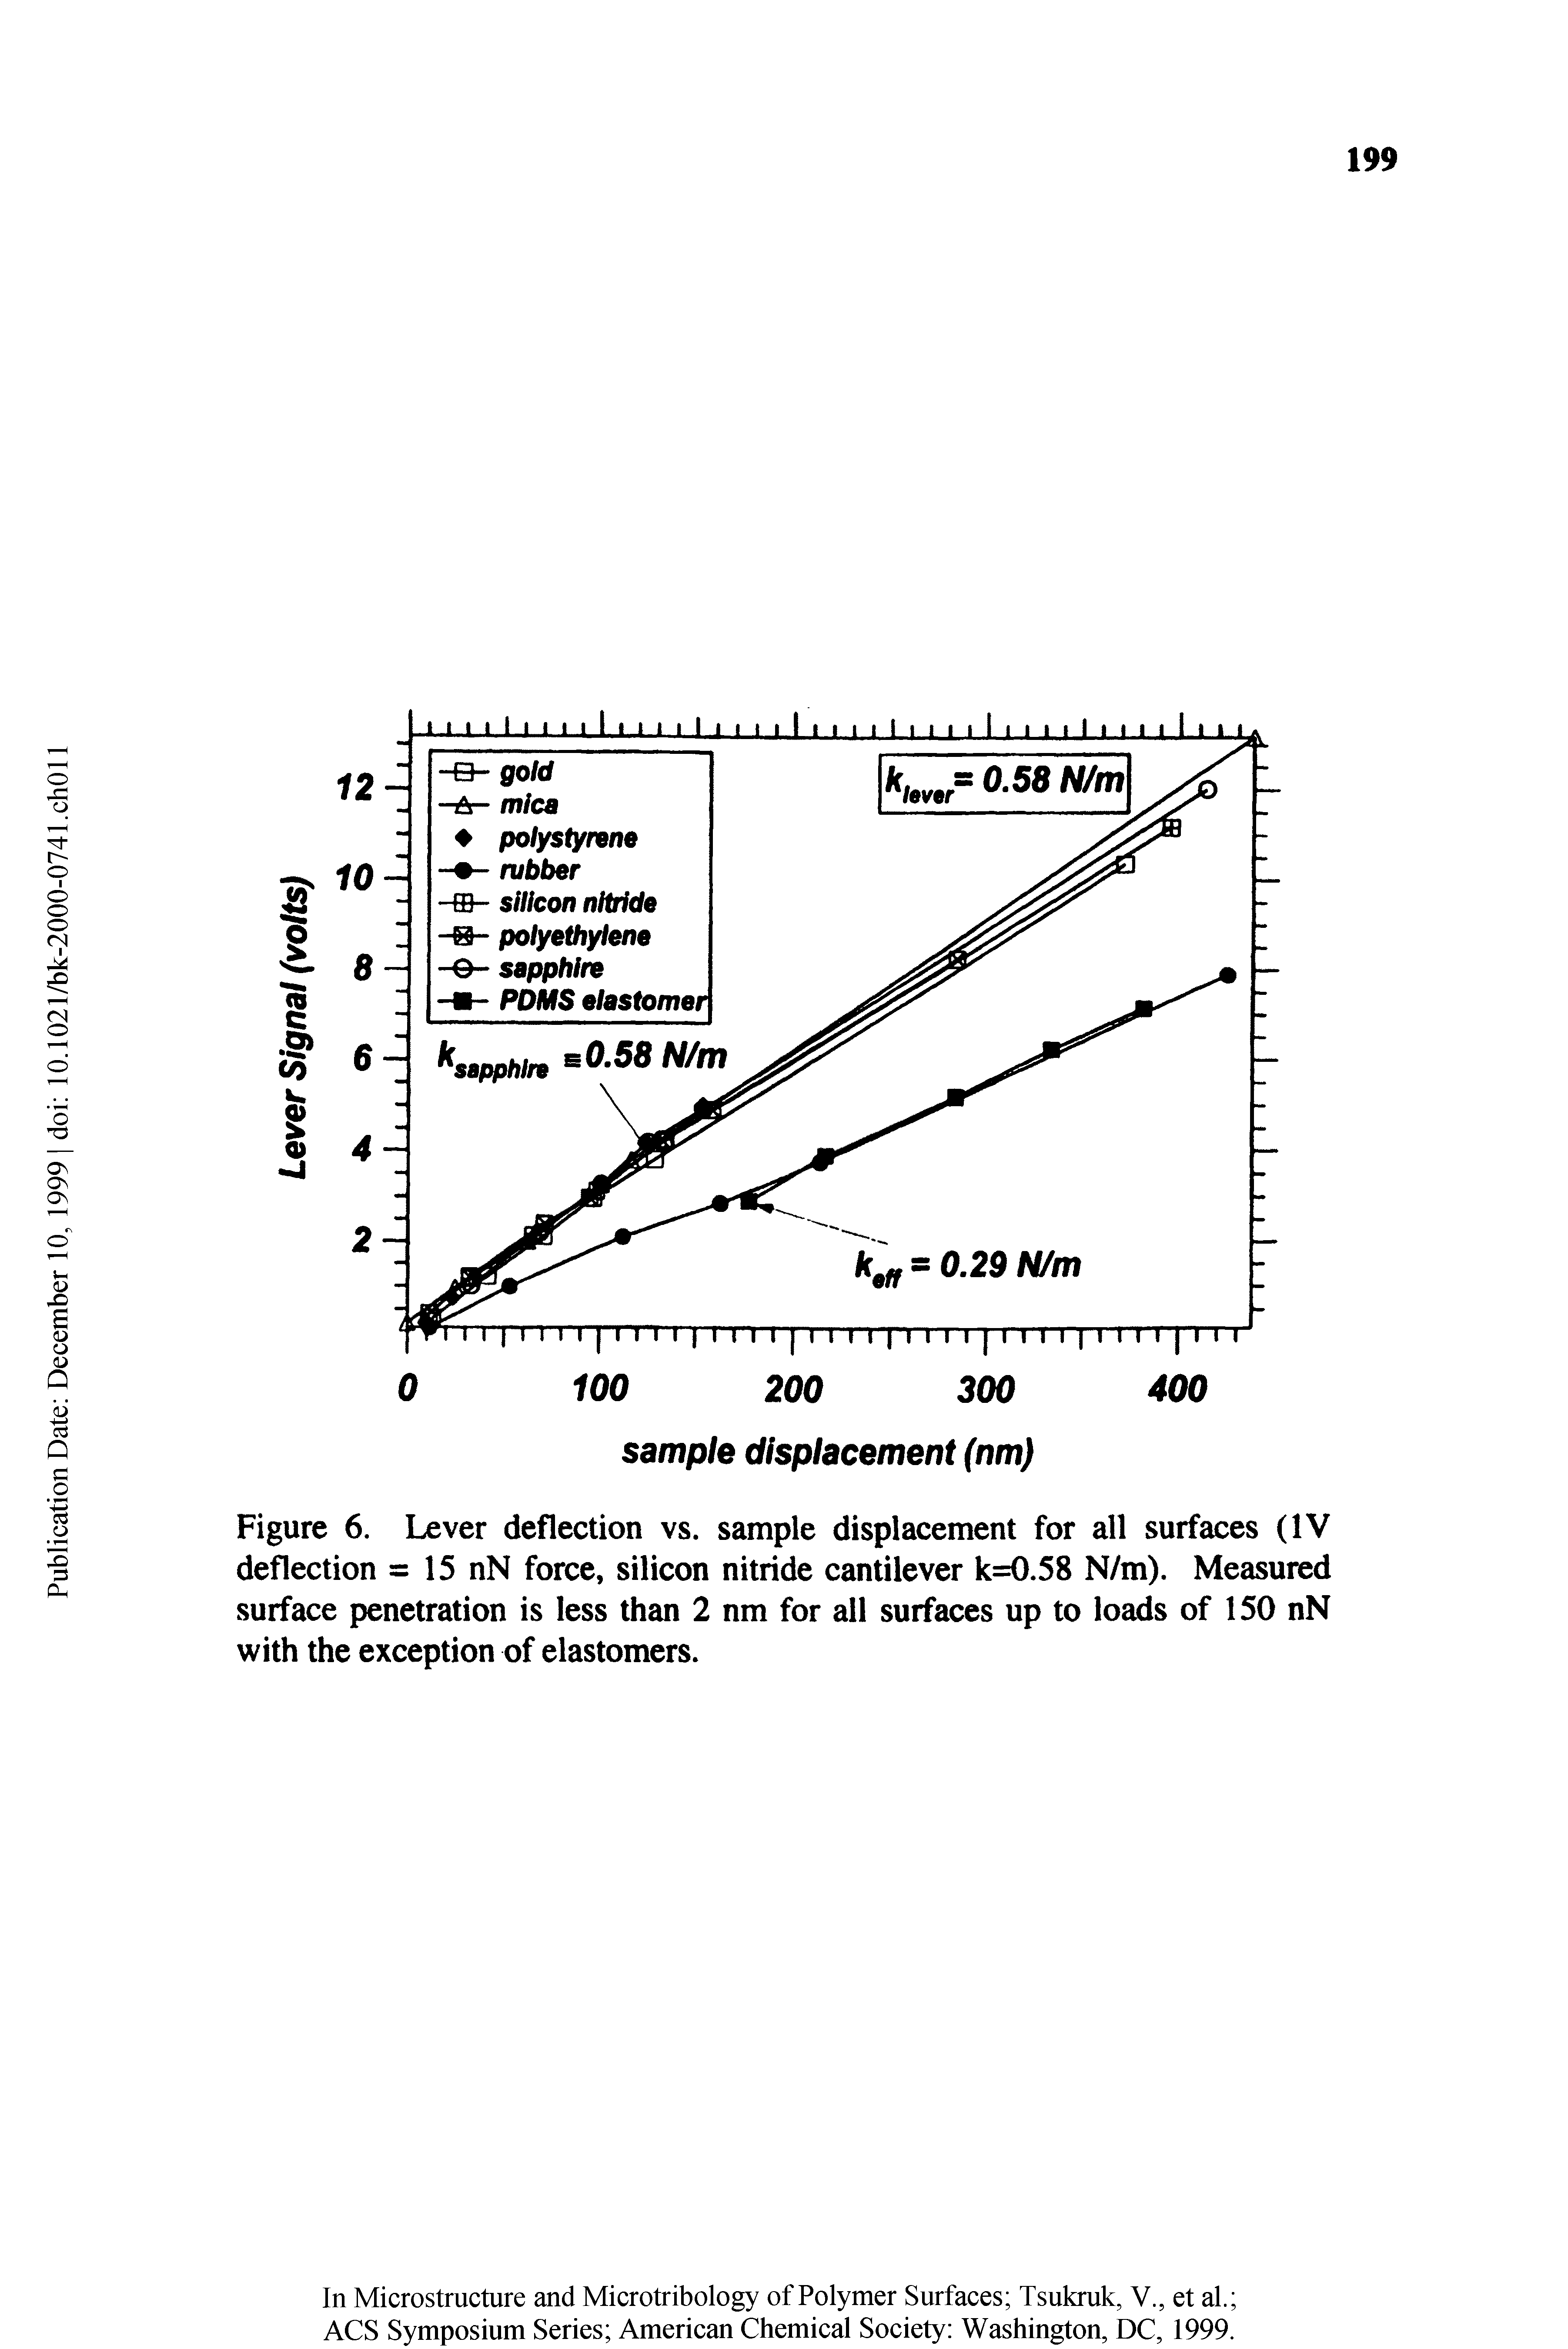 Figure 6. Lever deflection vs. sample displacement for all surfaces (IV deflection = 15 nN force, silicon nitride cantilever k=K).58 N/m). Measured surface penetration is less than 2 nm for all surfaces up to loads of 150 nN with the exception of elastomers.